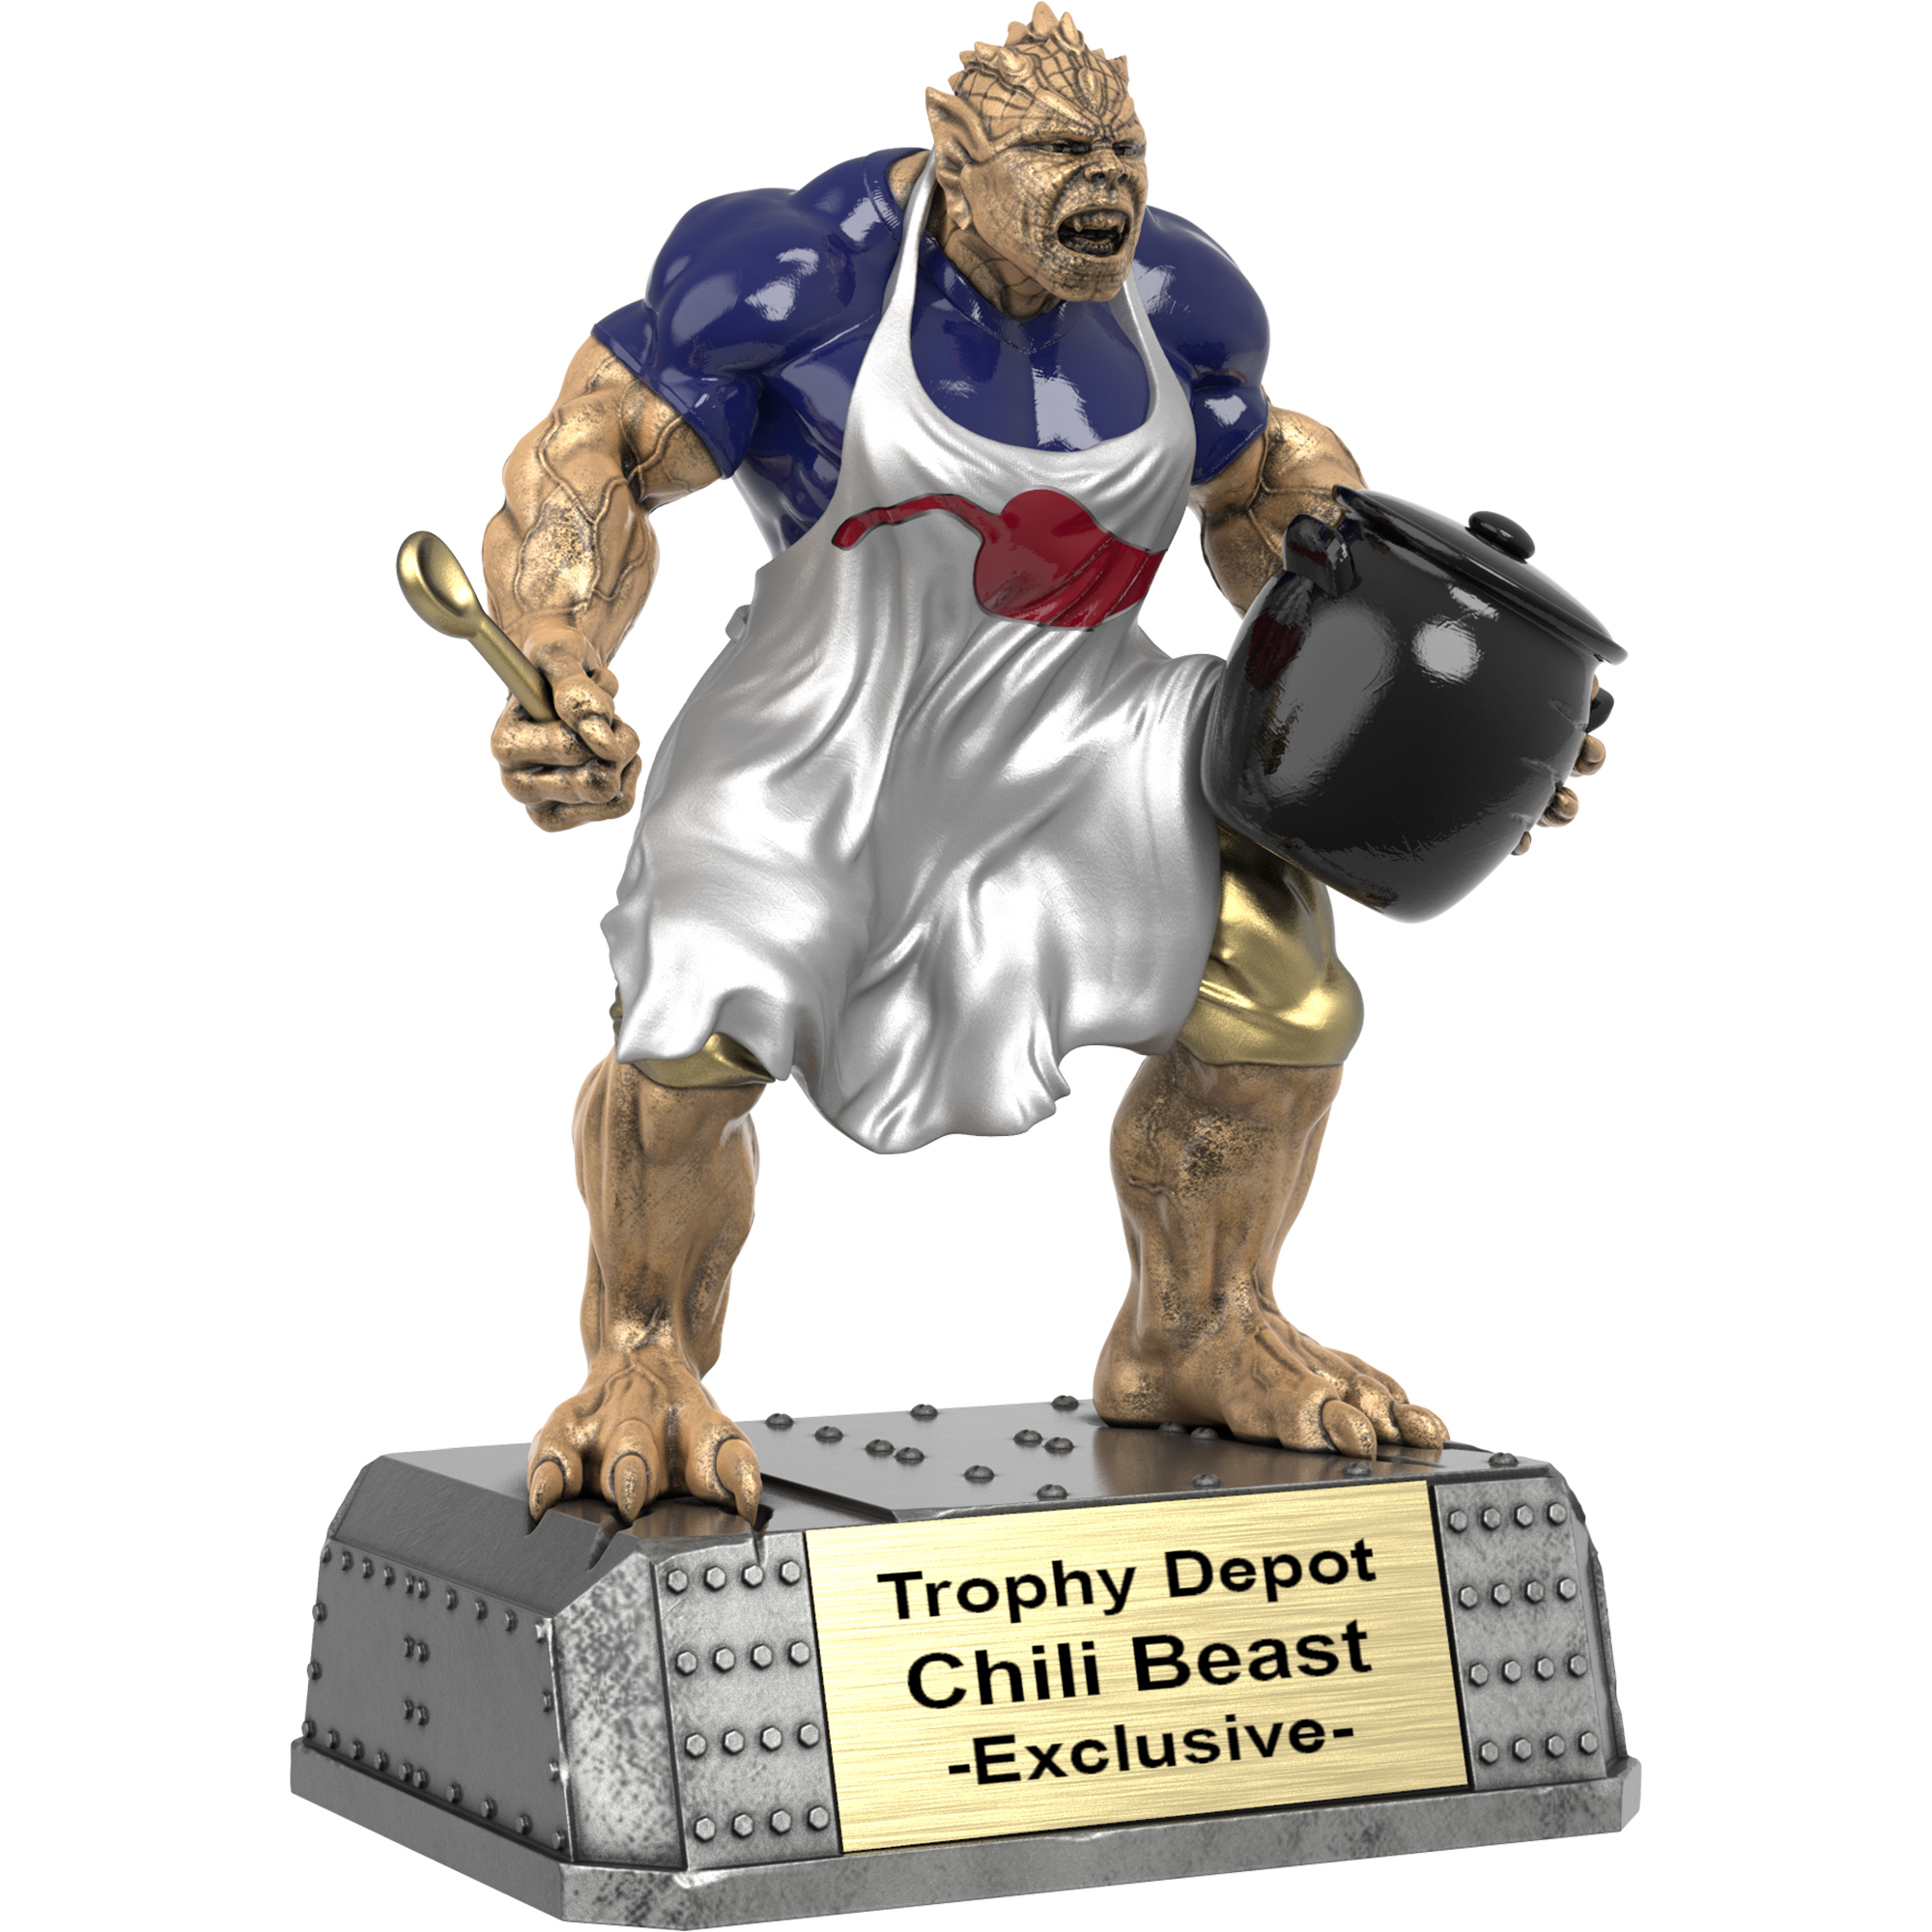 Chili Cook Beast Sculpture Trophy - 9.25 inch